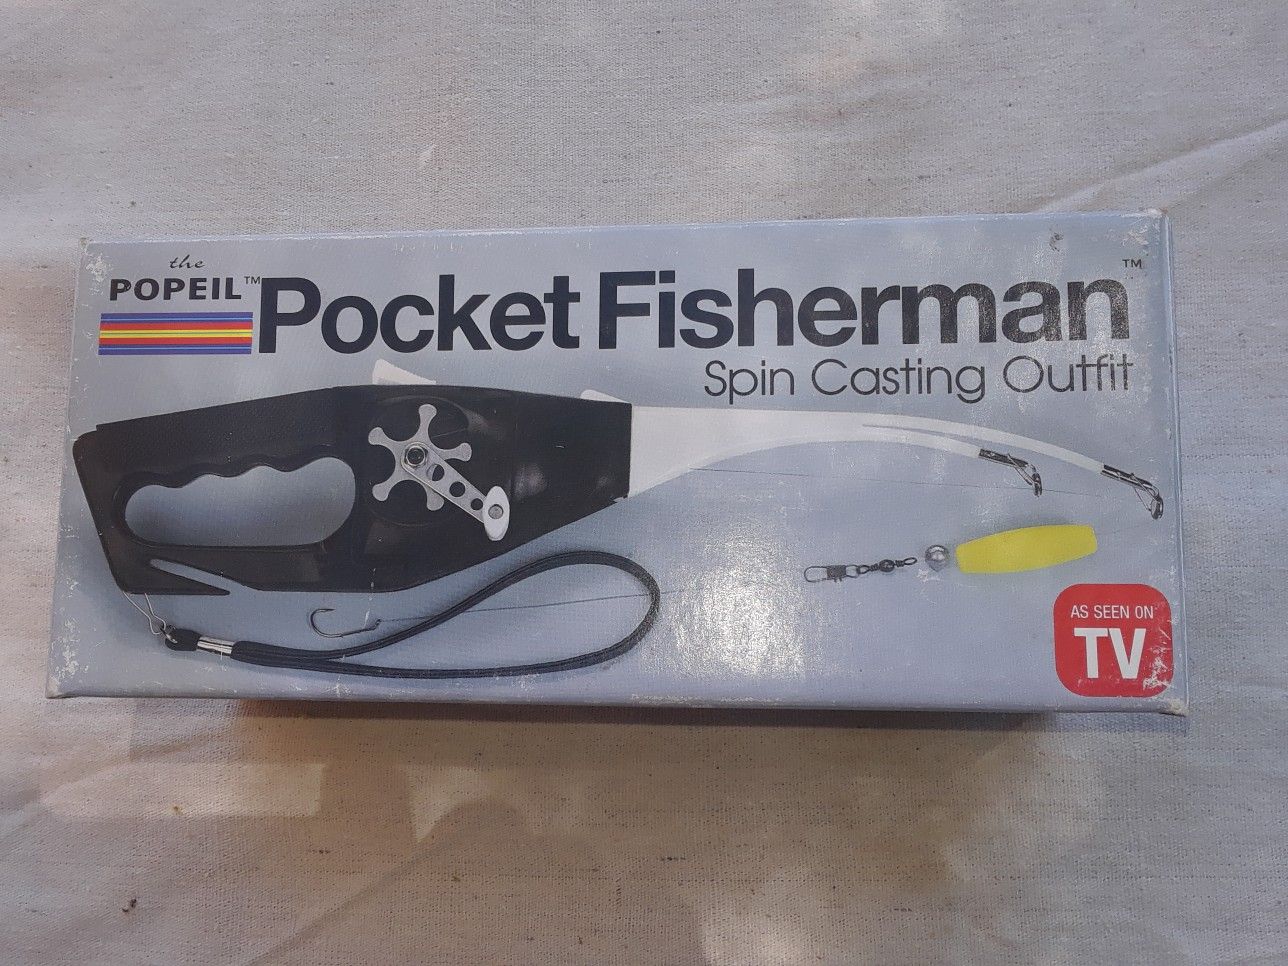 Propel Pocket Fisherman spin casting outfit Box new perfect first time Fisher or backpacking $10 or best offer